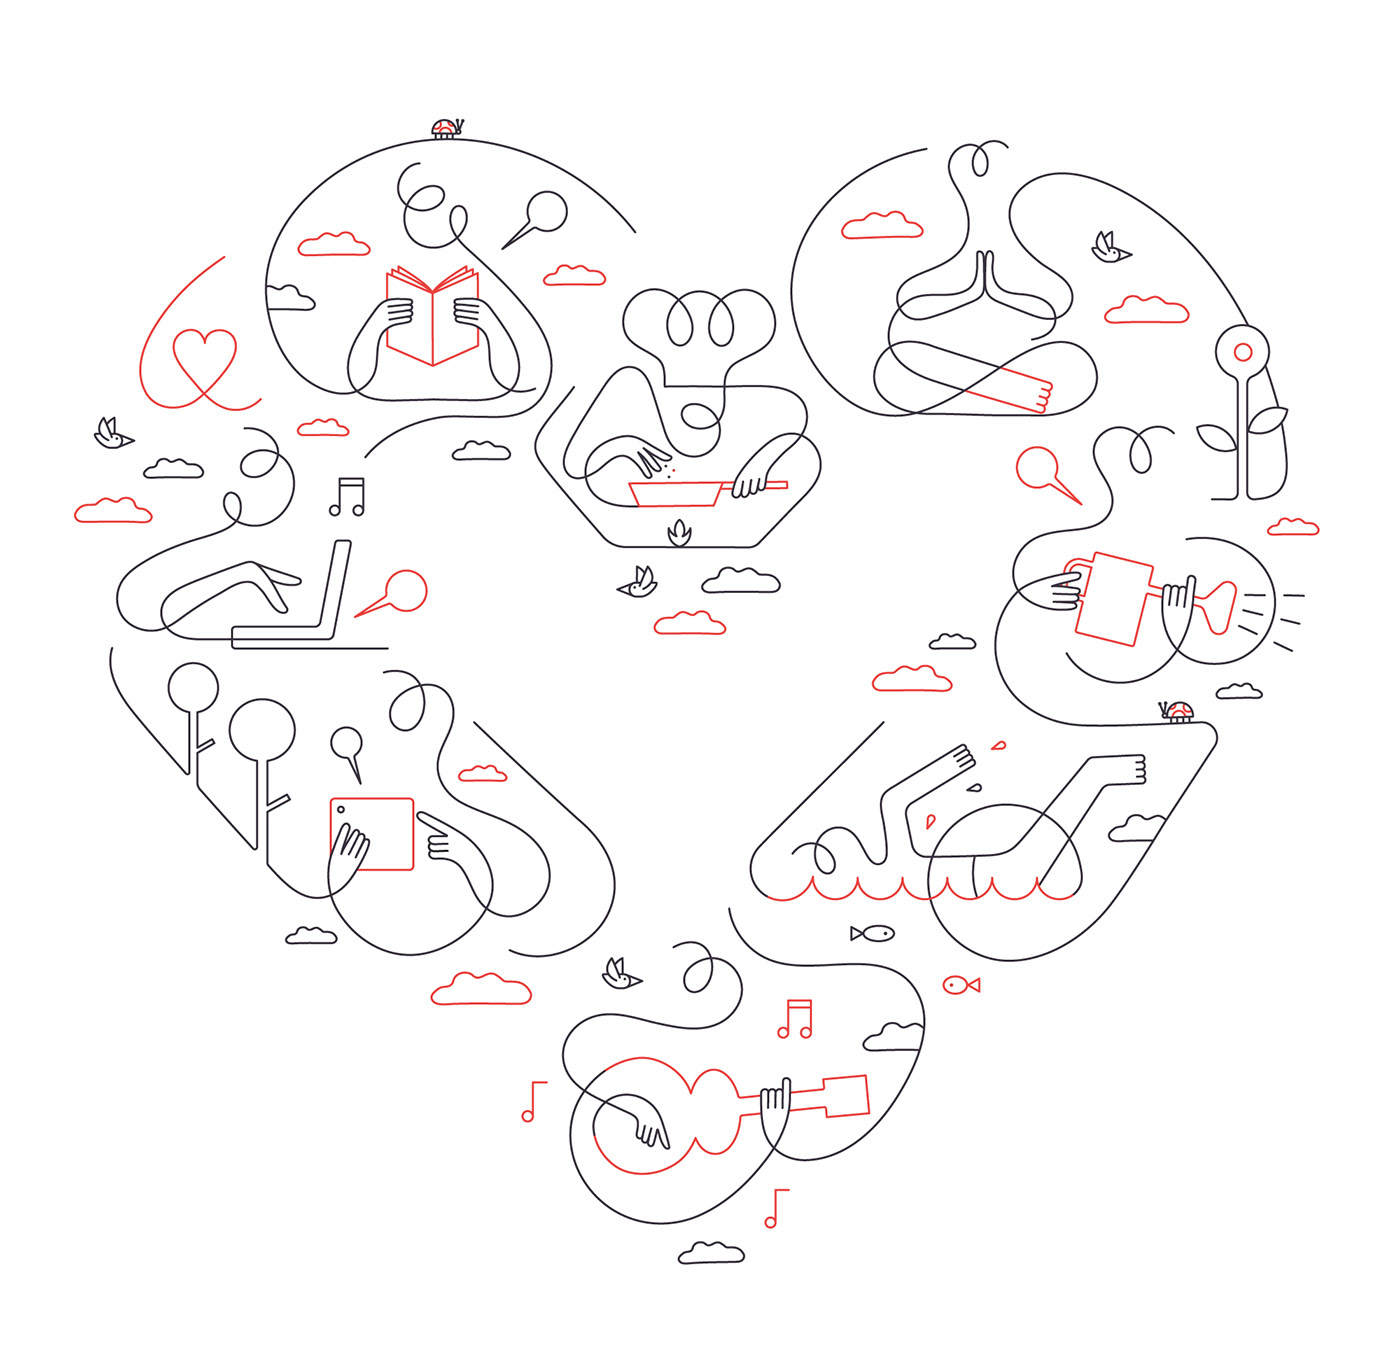 connection oneline together Lovers minimal identity ILLUSTRATION  branding  linedrawing lineart